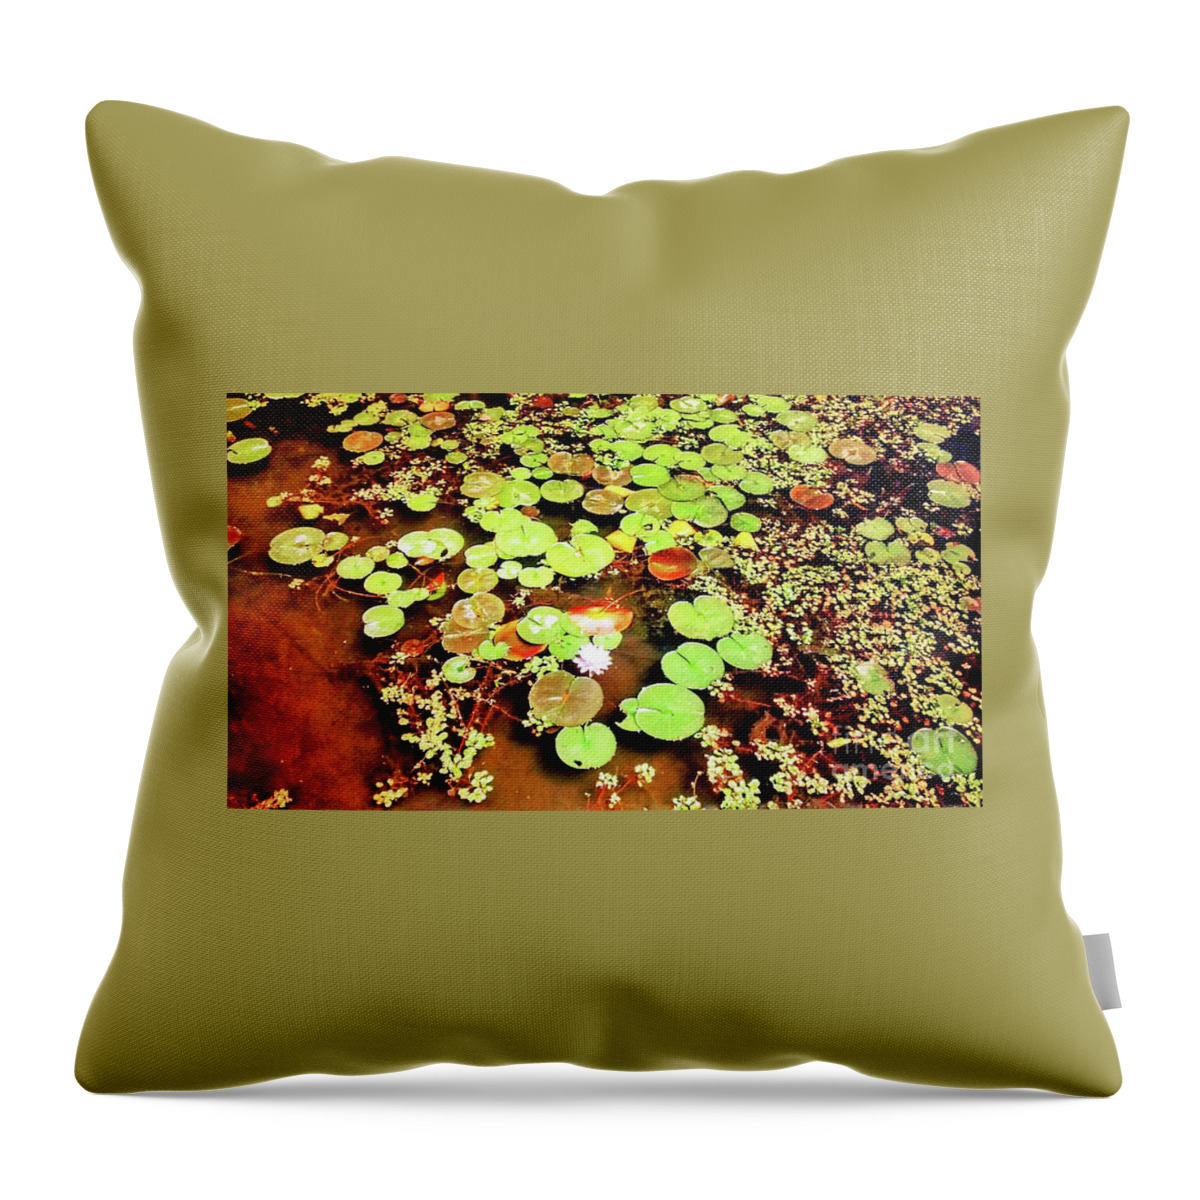 Water Lilies Throw Pillow featuring the painting Water Lilies by Genevieve Esson